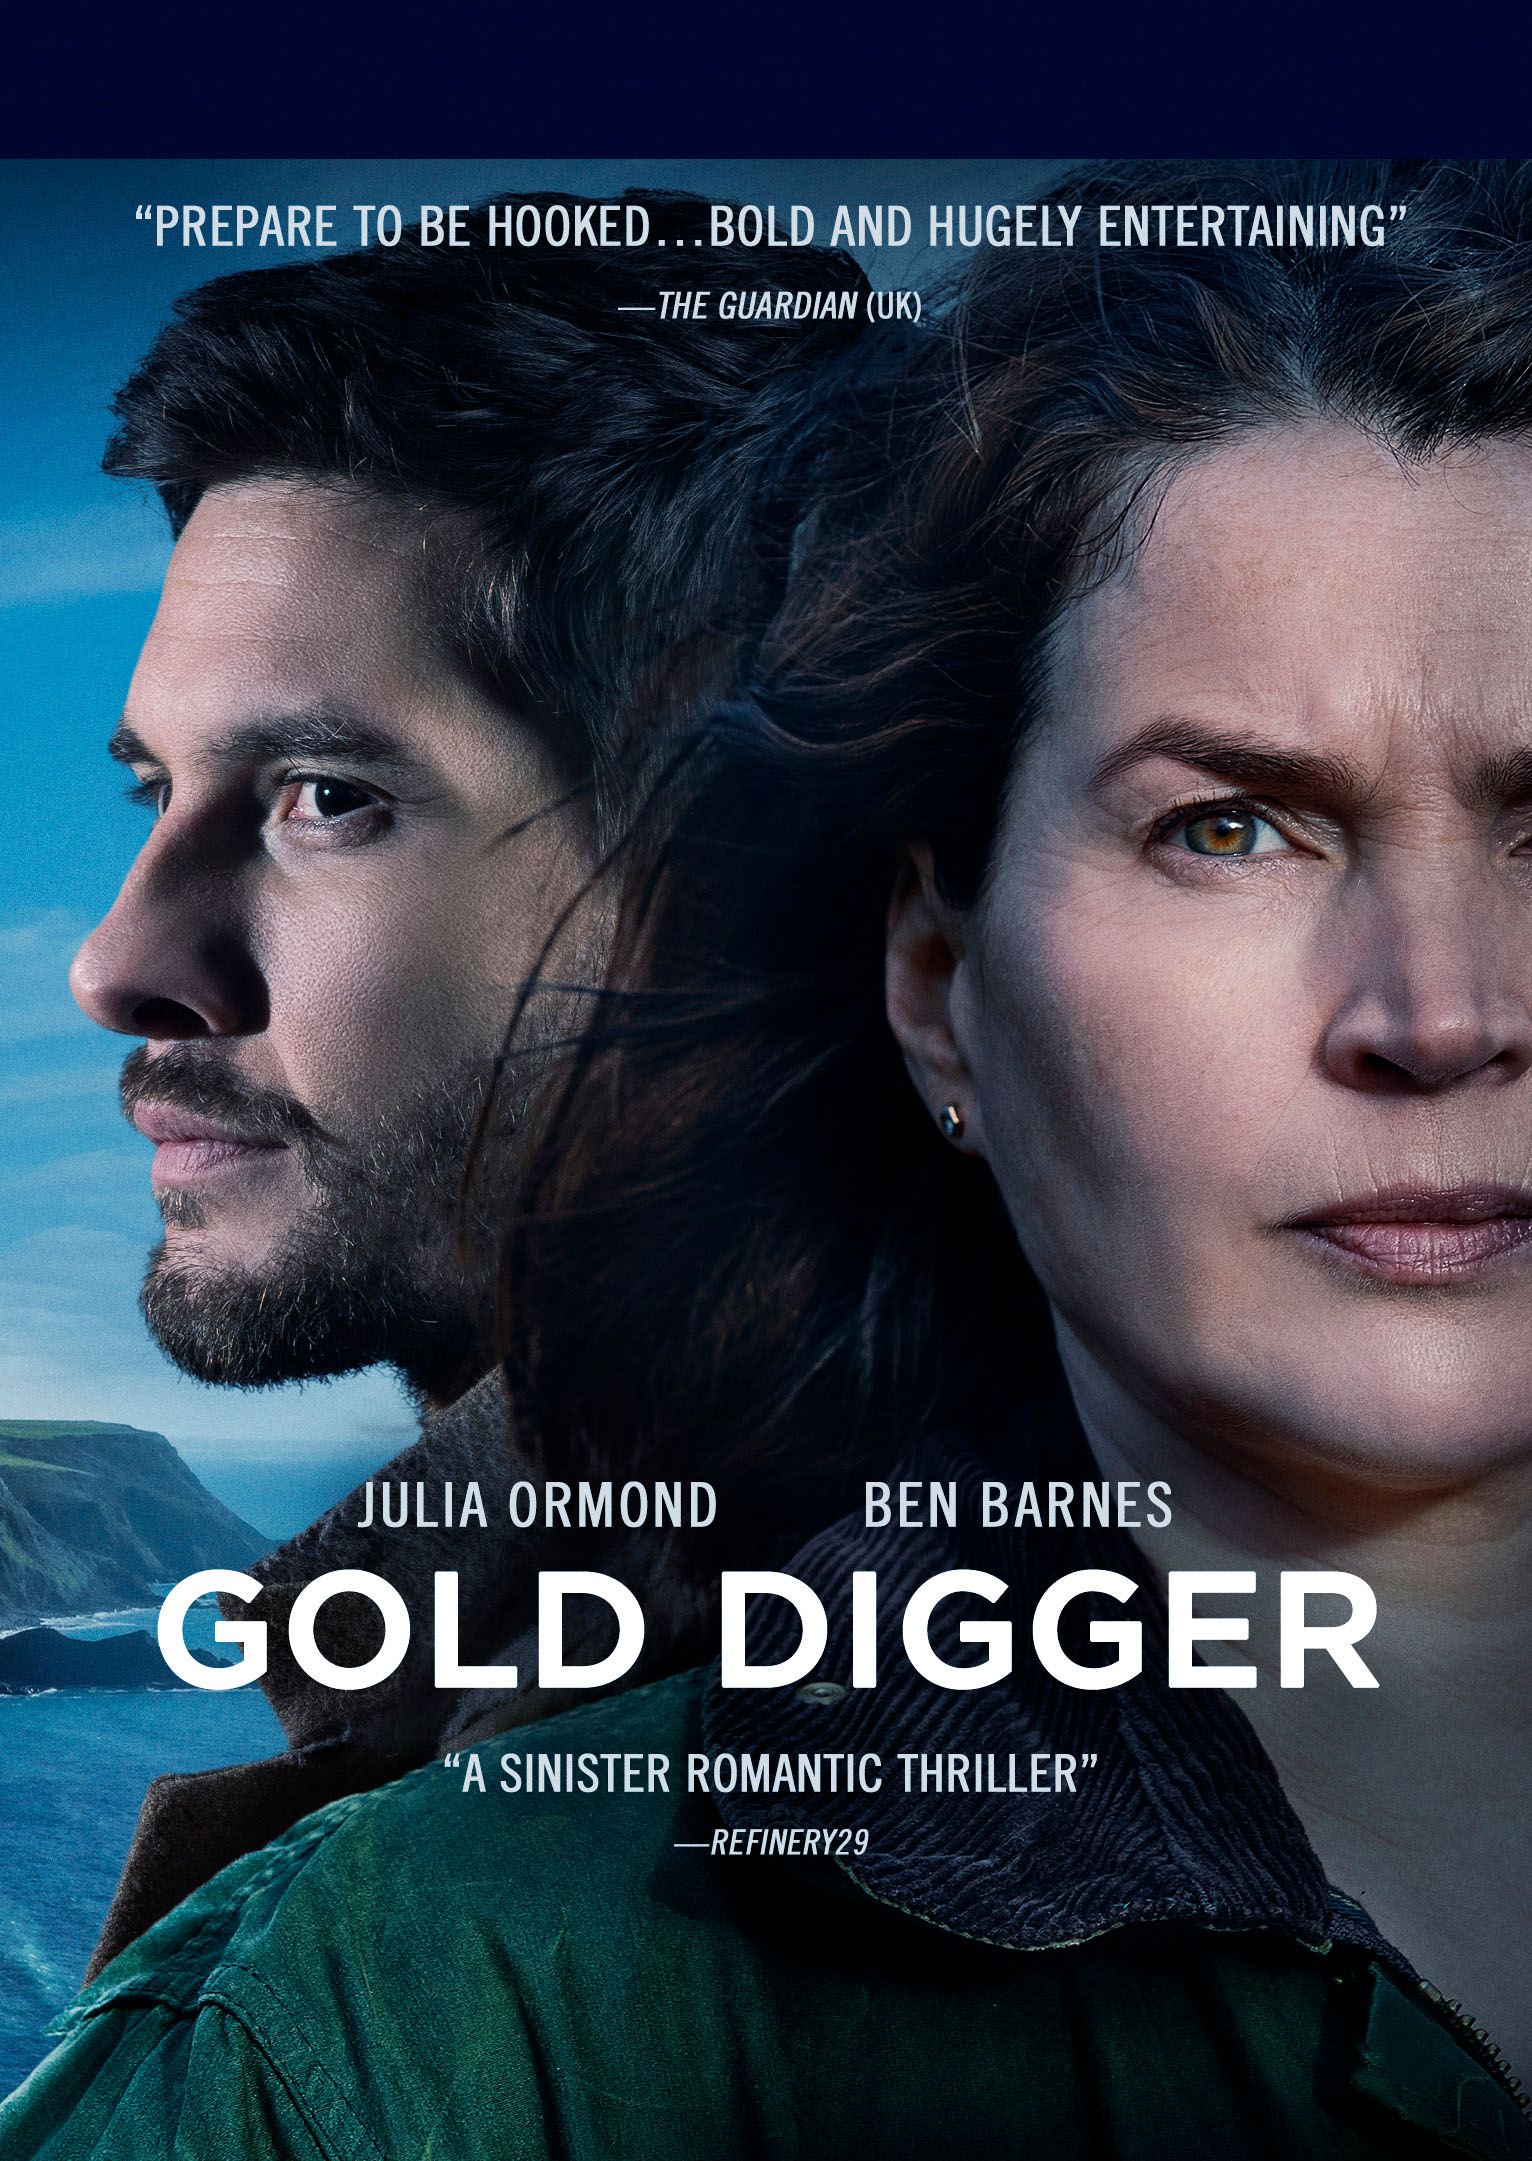 Gold Diggers (2023) - Filmaffinity